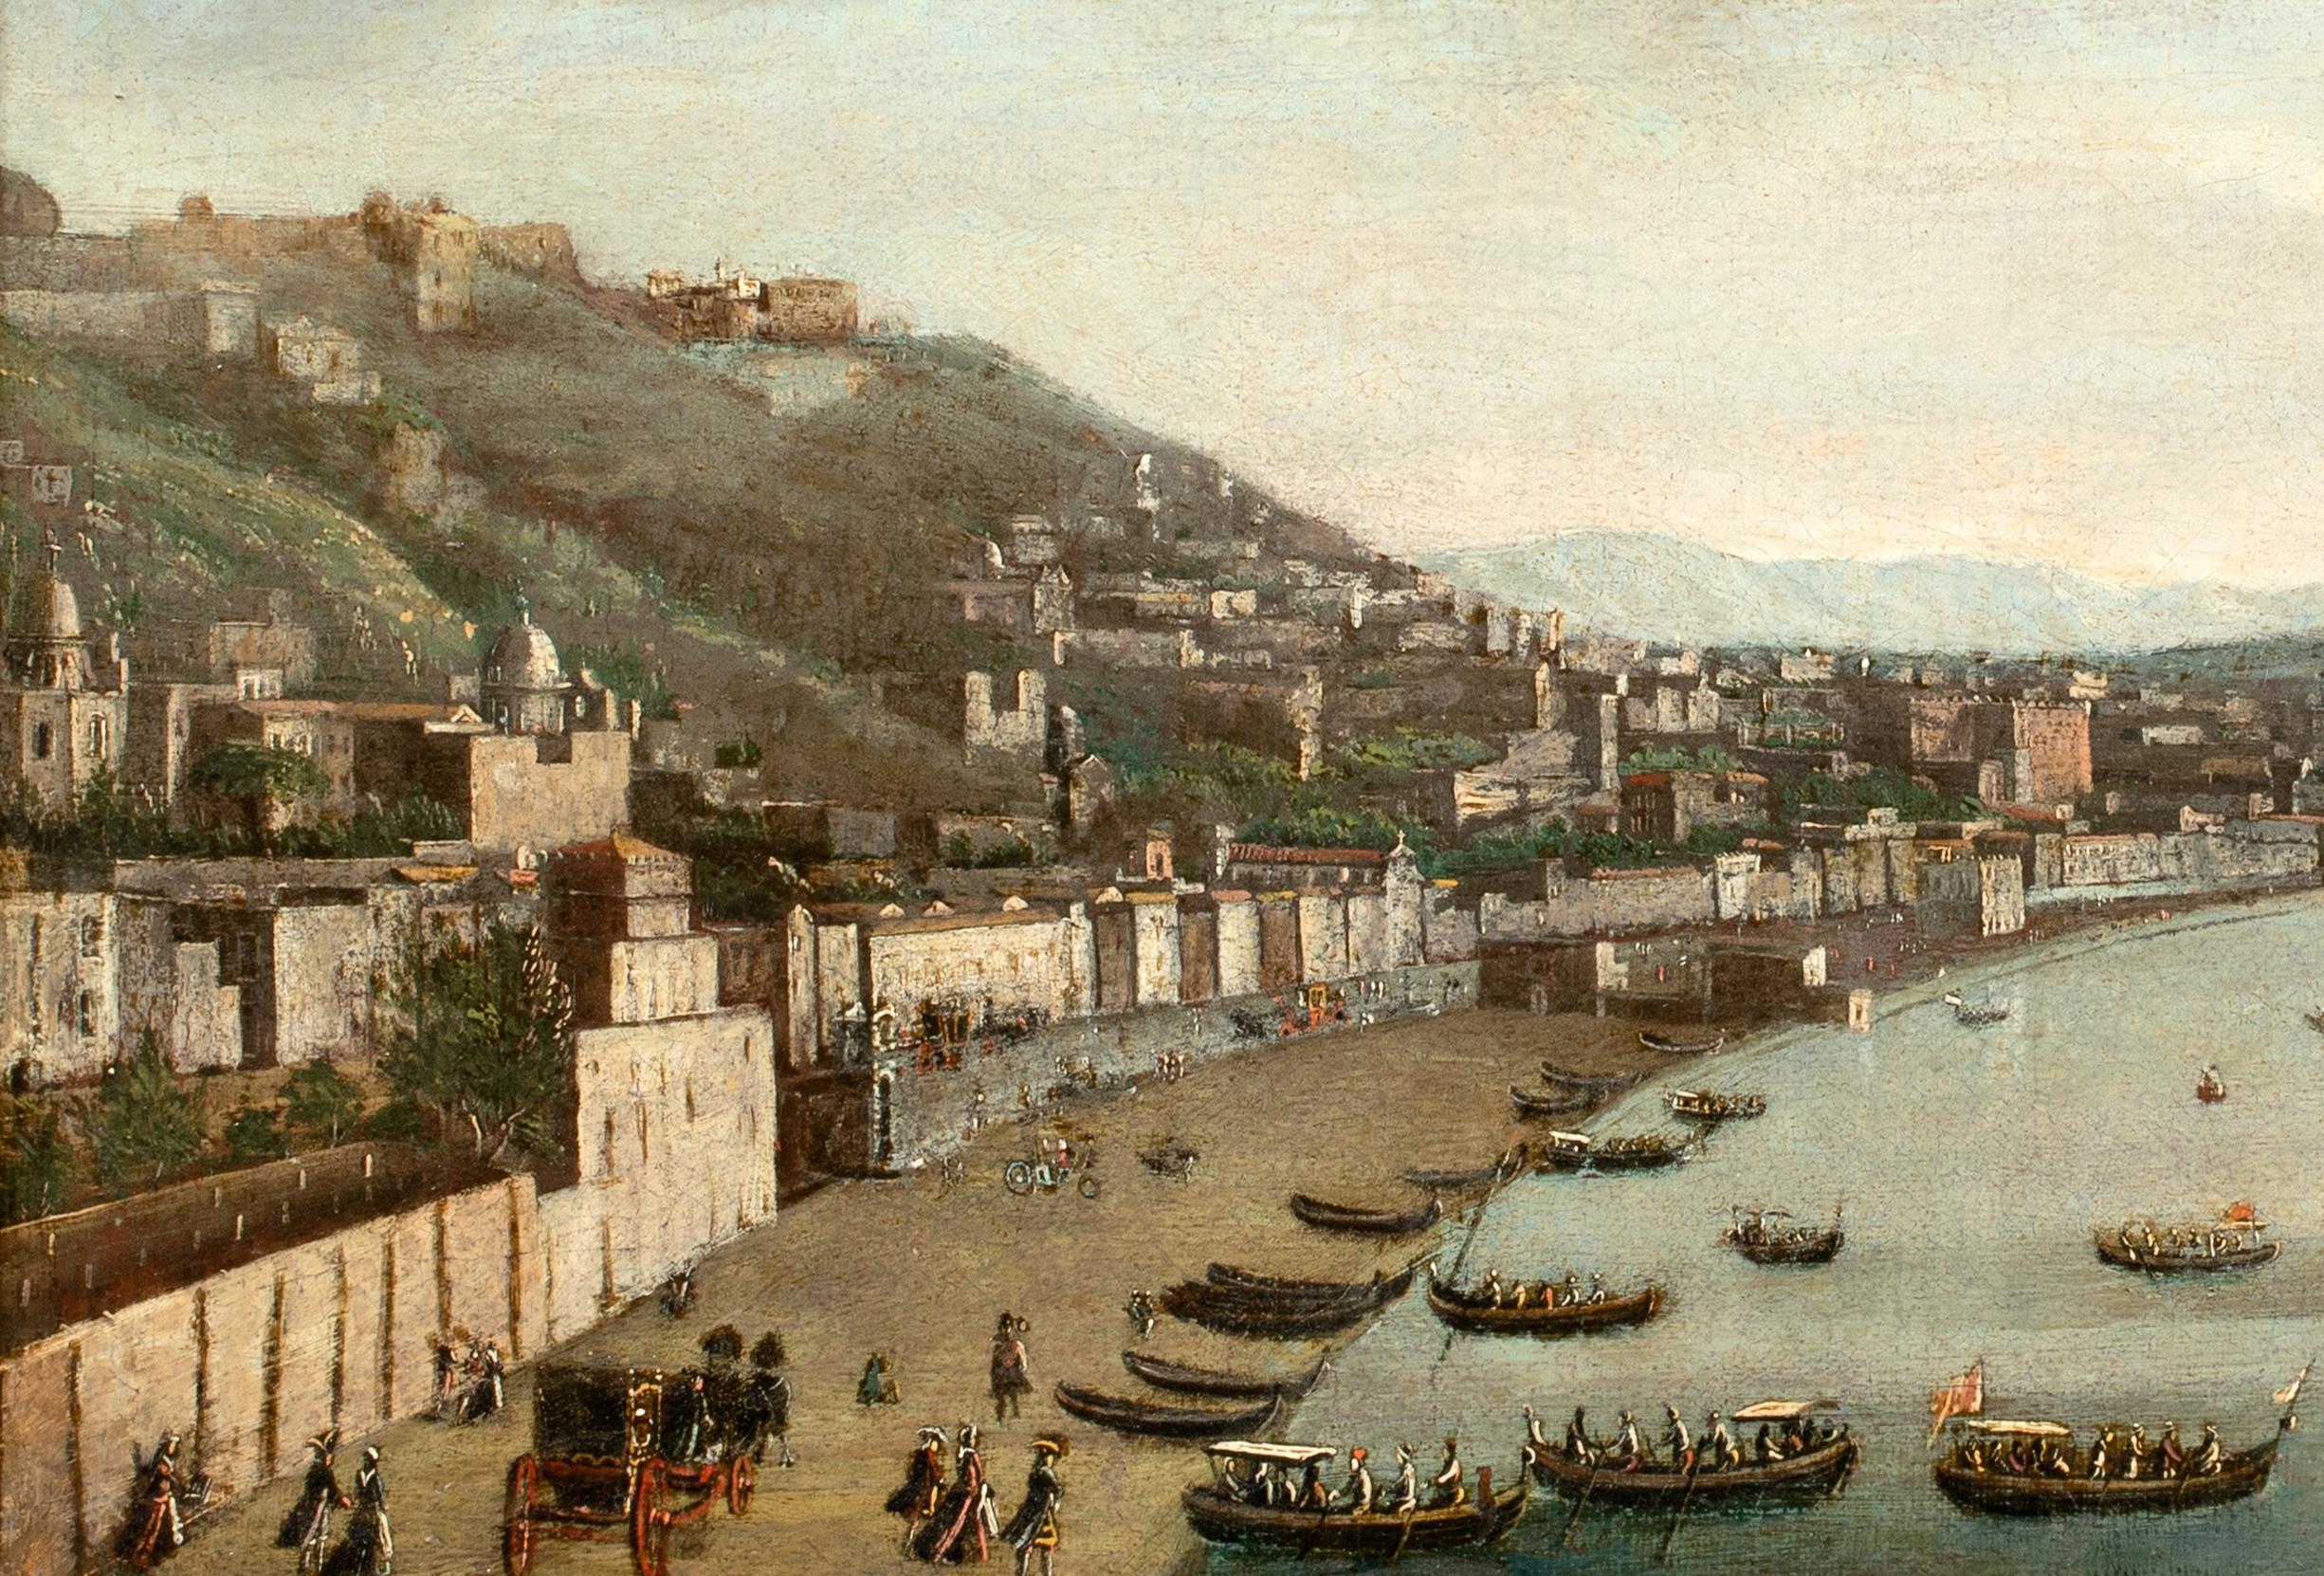 Bay Of Naples, From Posillipo To Mount Vesuvius, circa 1700 - Brown Landscape Painting by Angelo Maria Costa